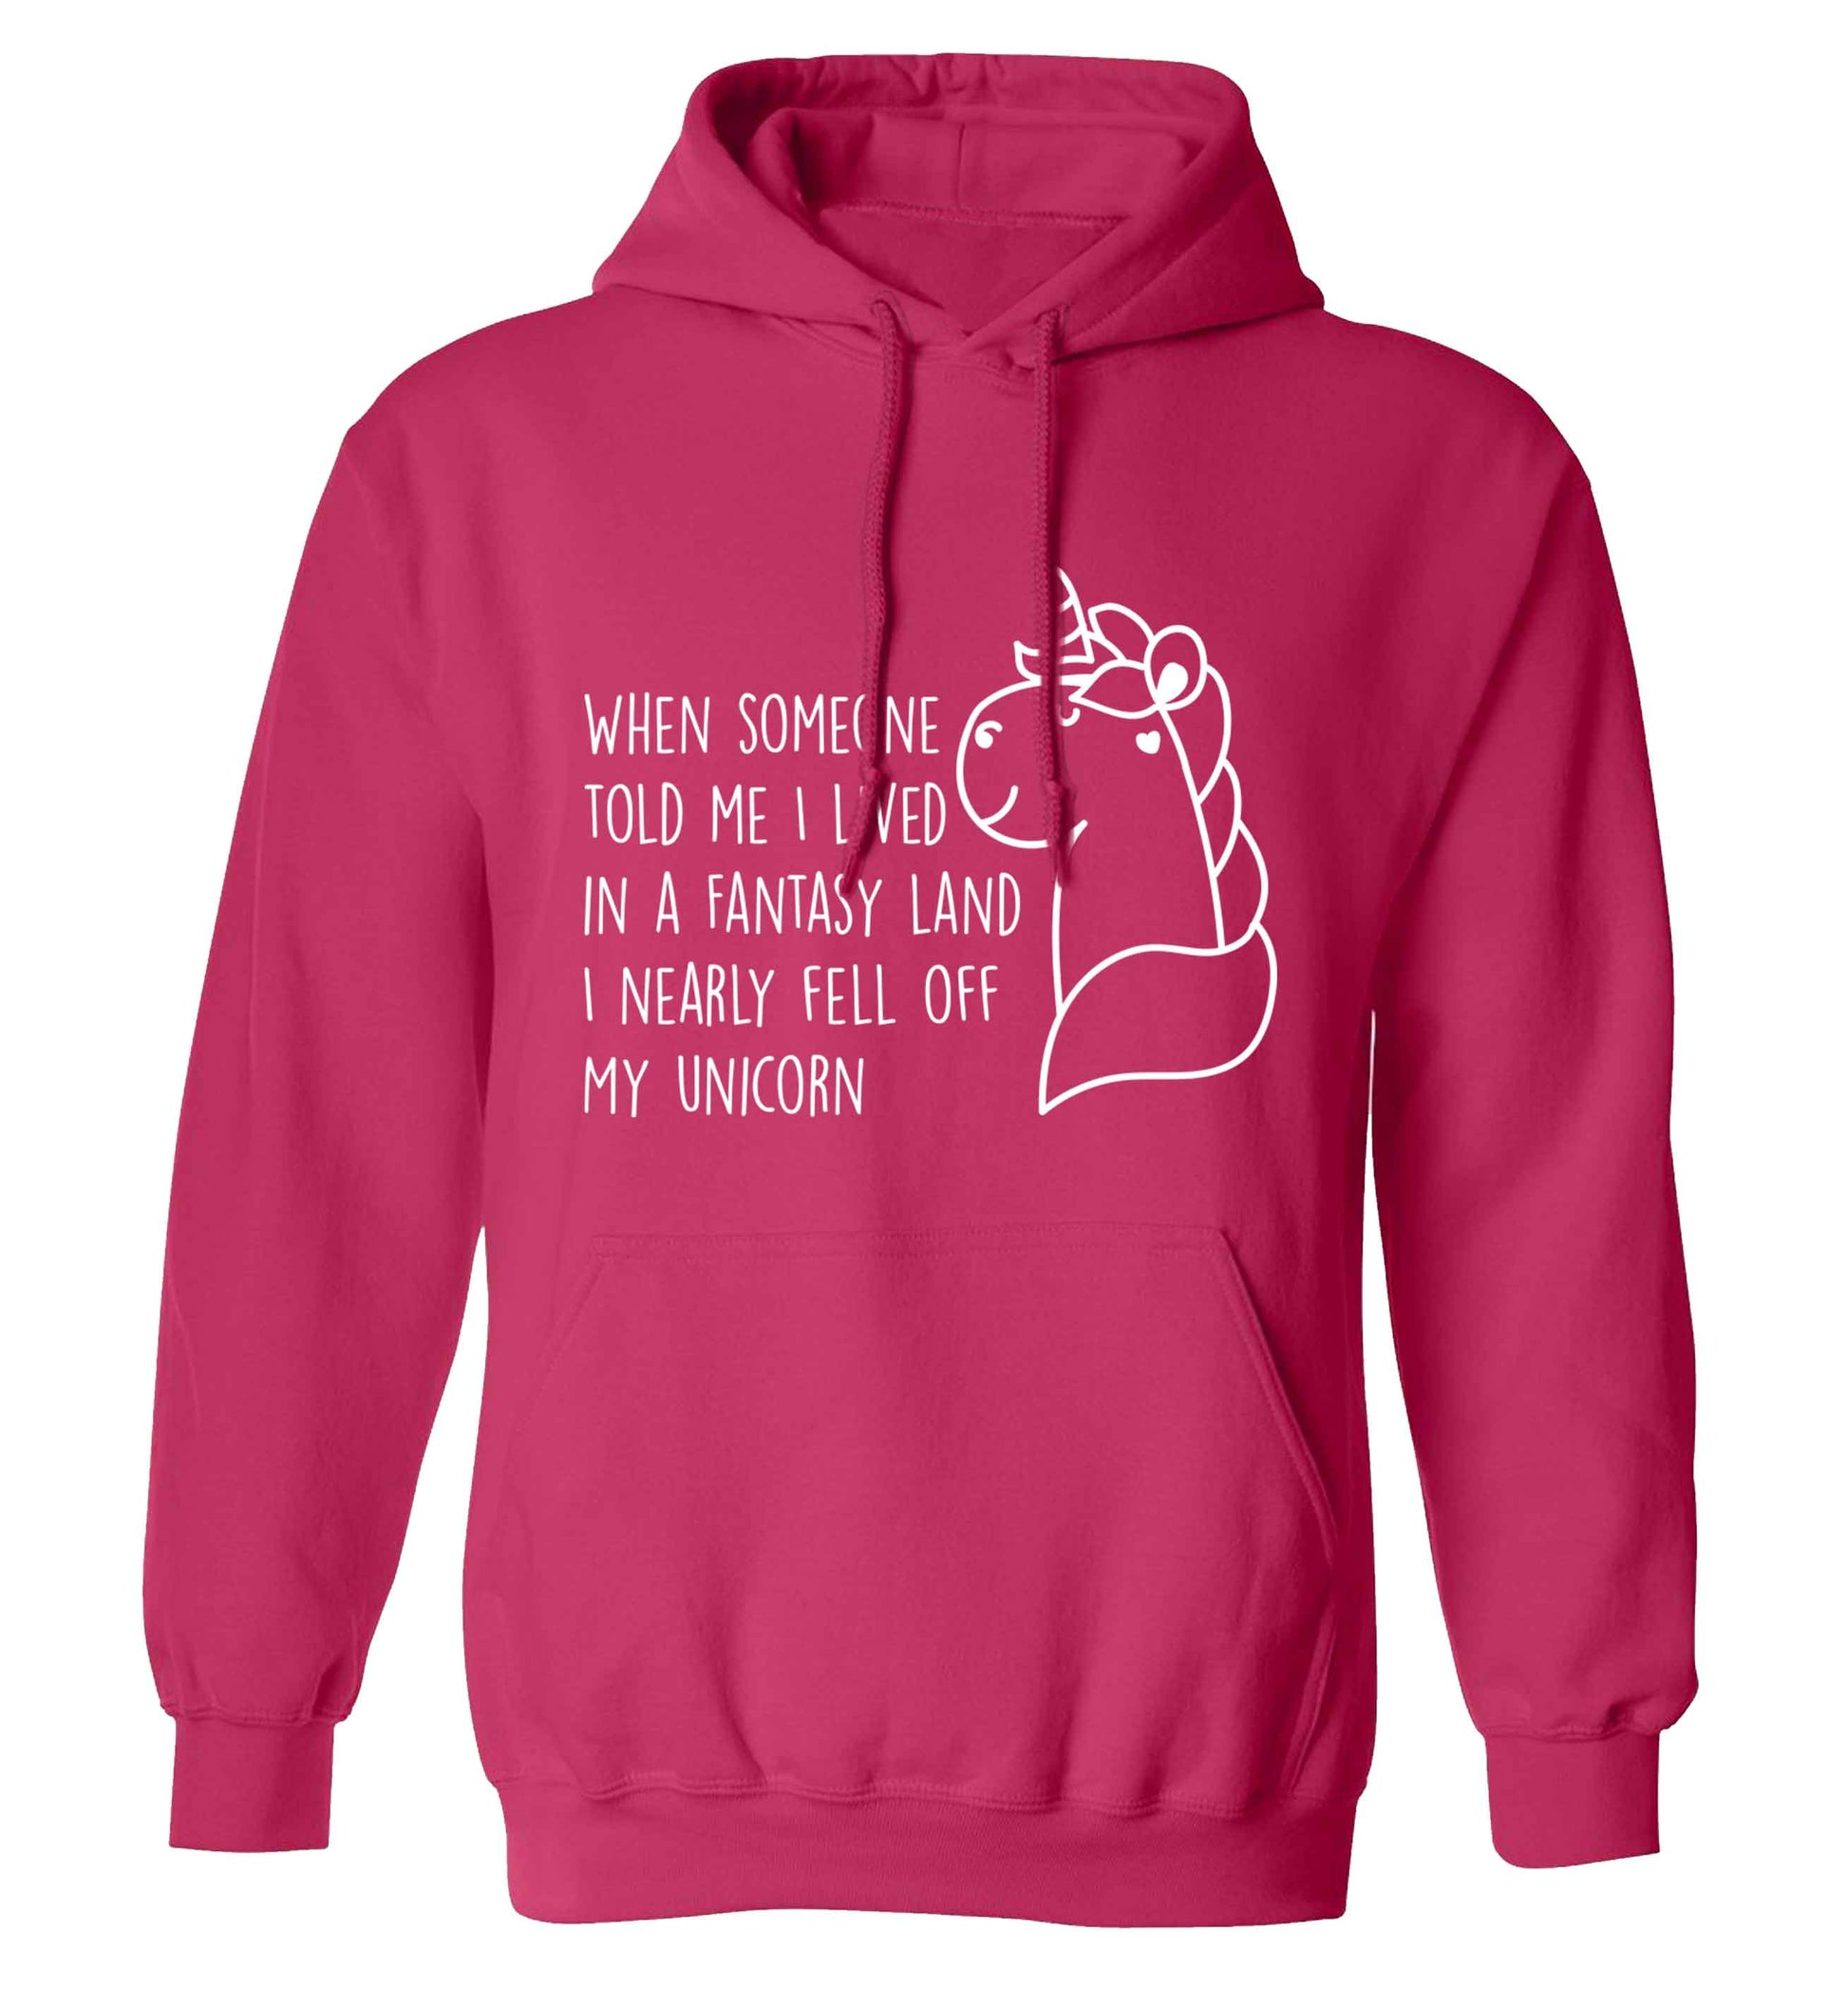 When somebody told me I lived in a fantasy land I nearly fell of my unicorn adults unisex pink hoodie 2XL